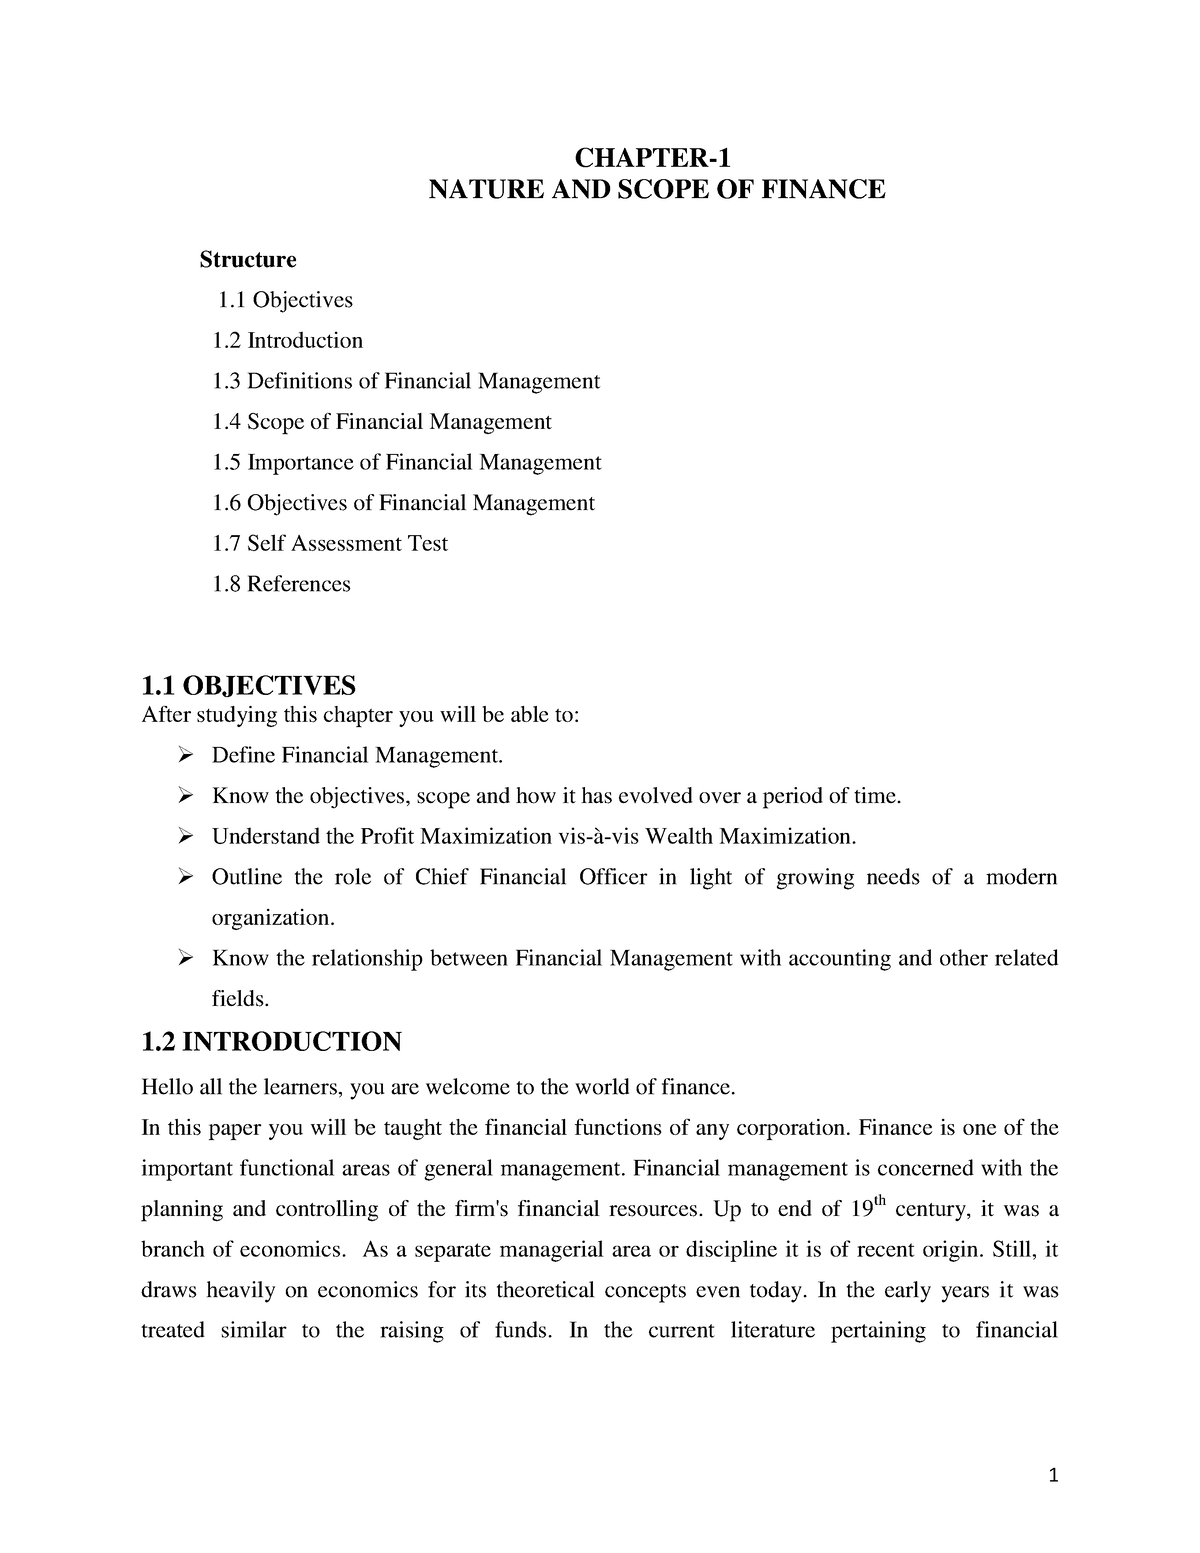 nature of financial management